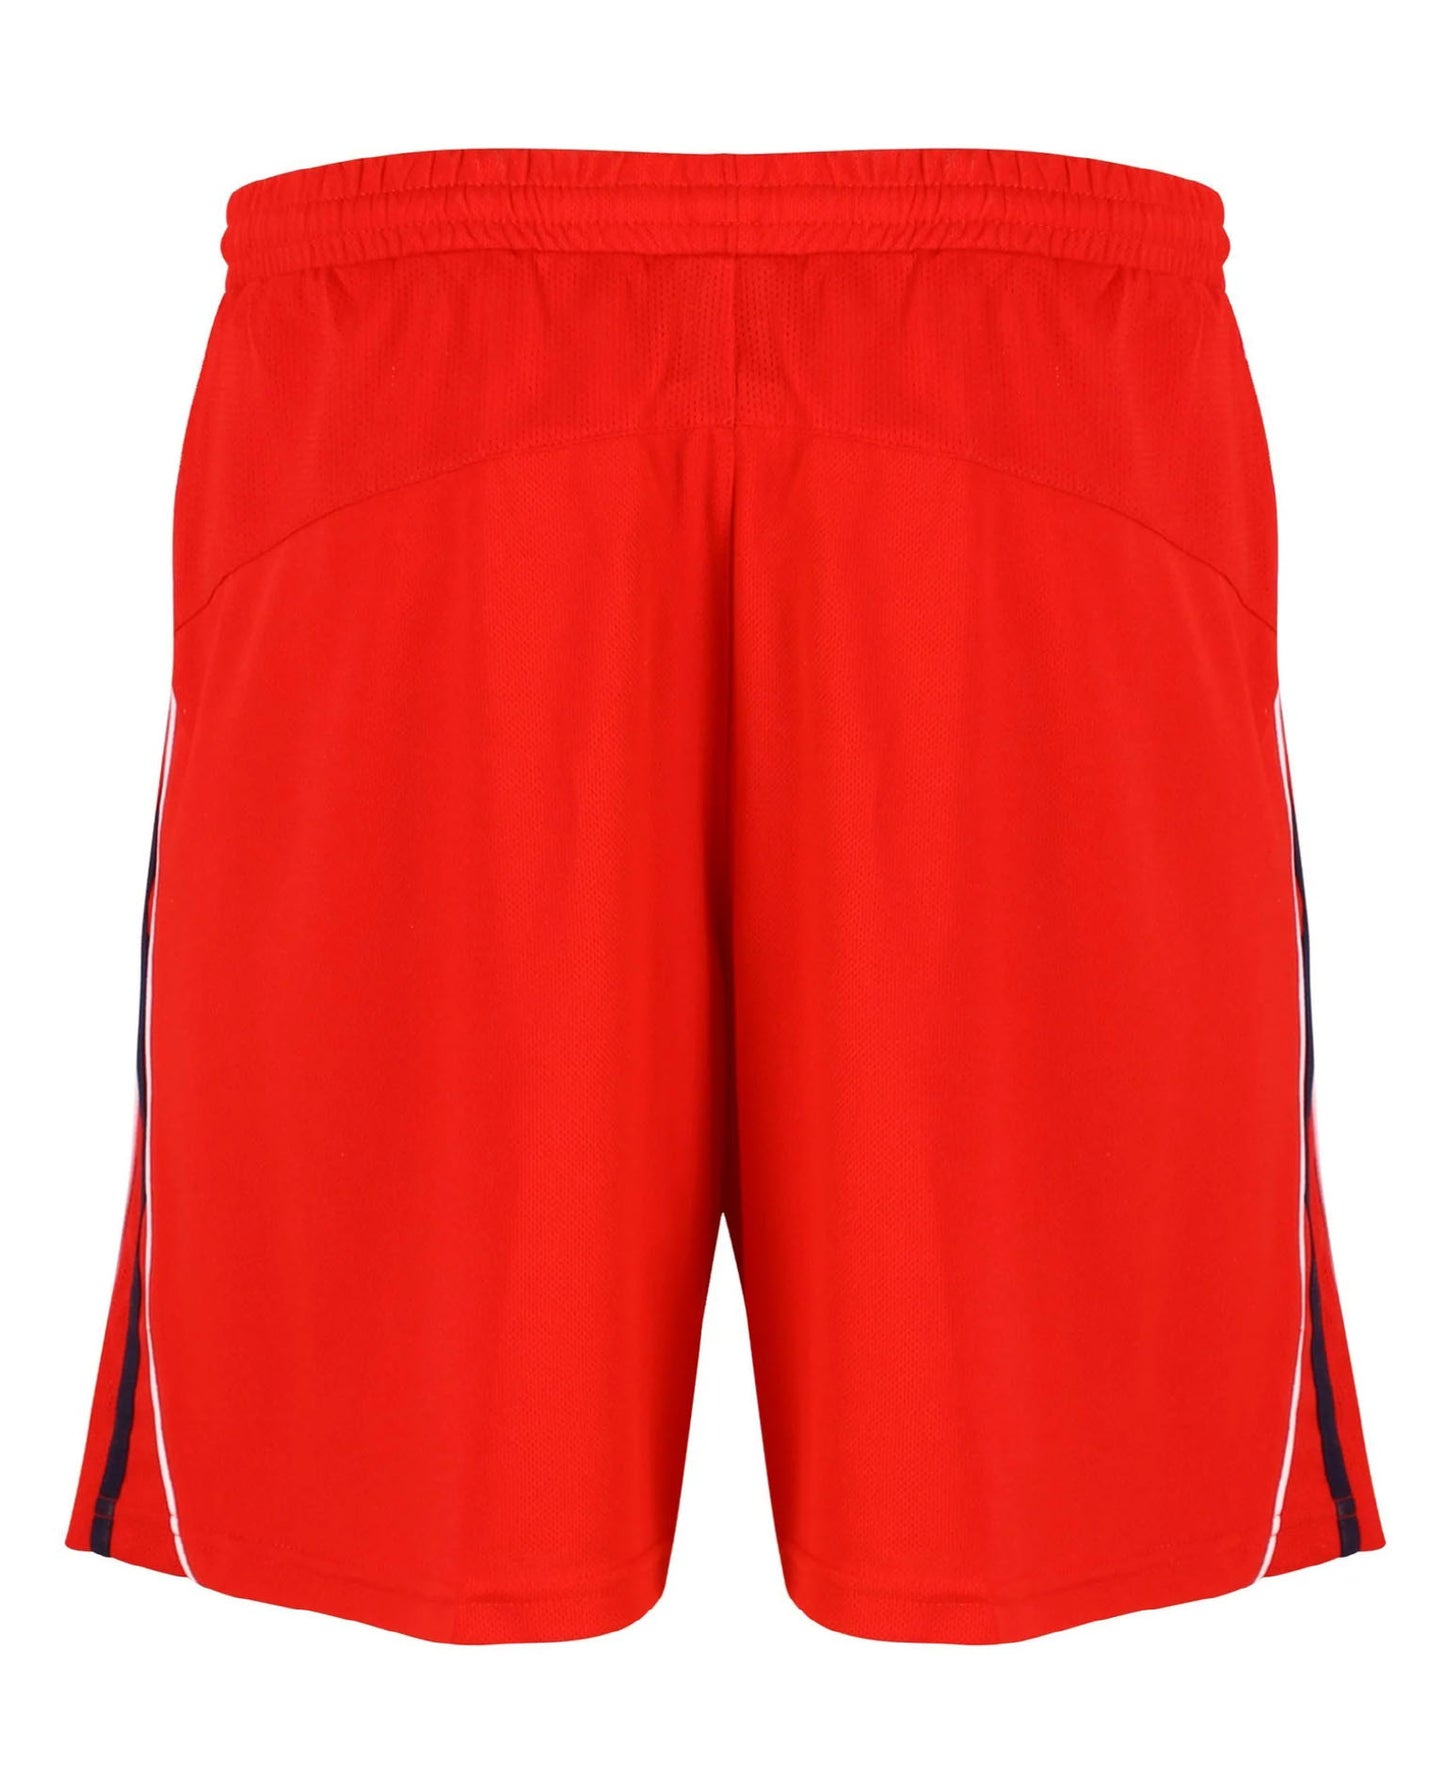 Track Mesh Shorts - Red